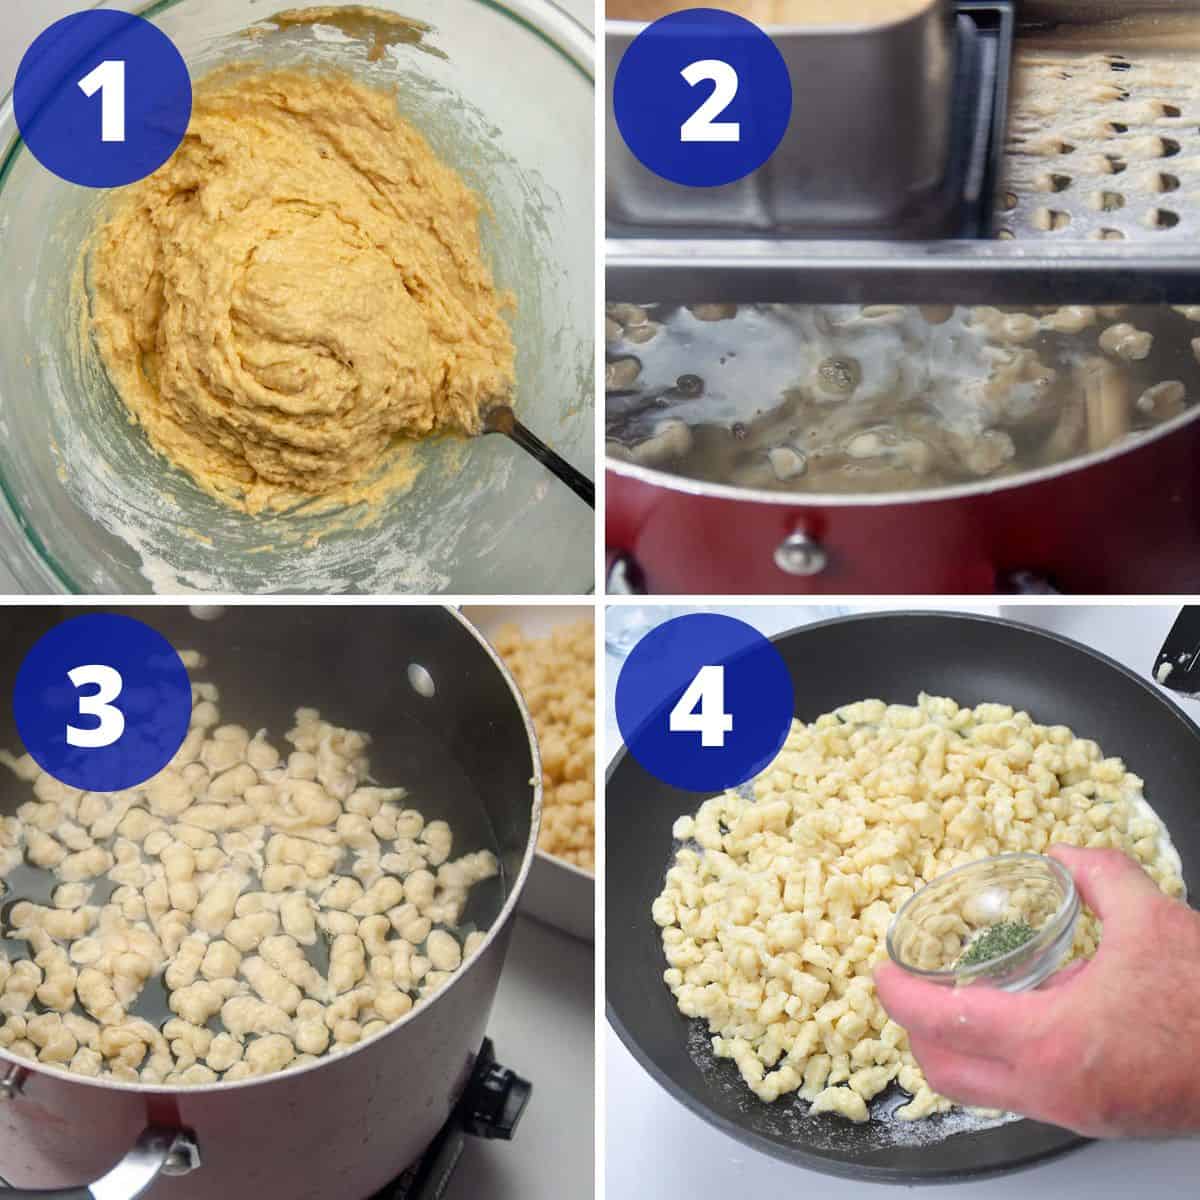 Showing how to make Spaetzle and fry it.